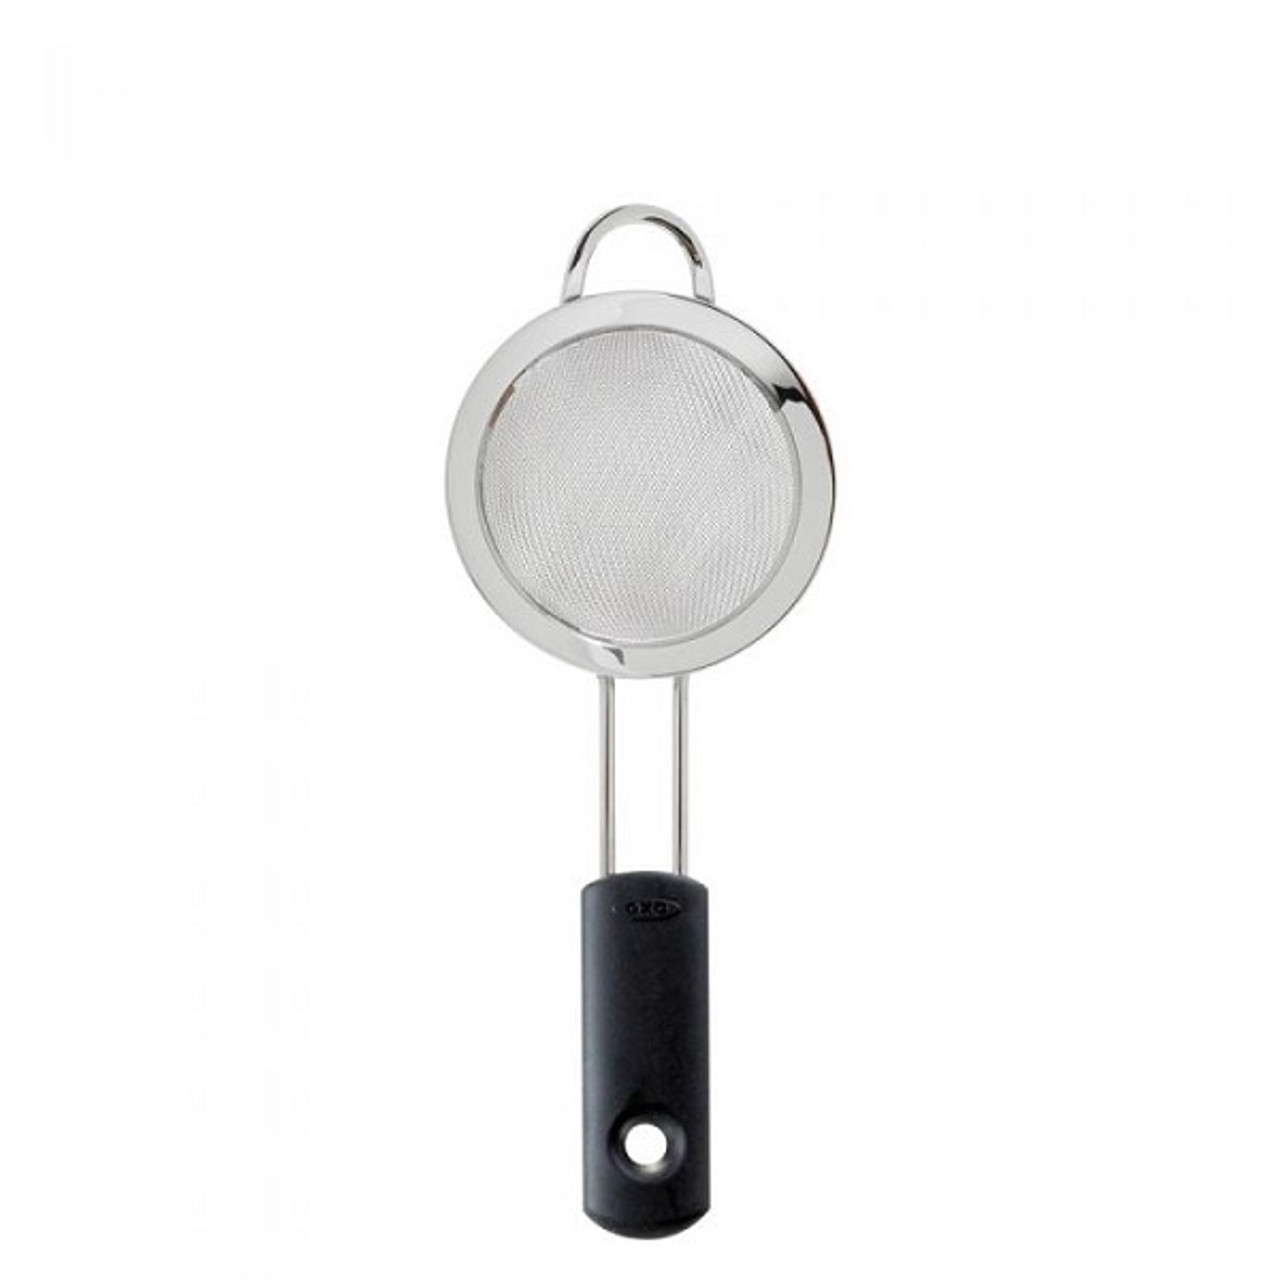 OXO Good Grips Strainer, 8 Inch